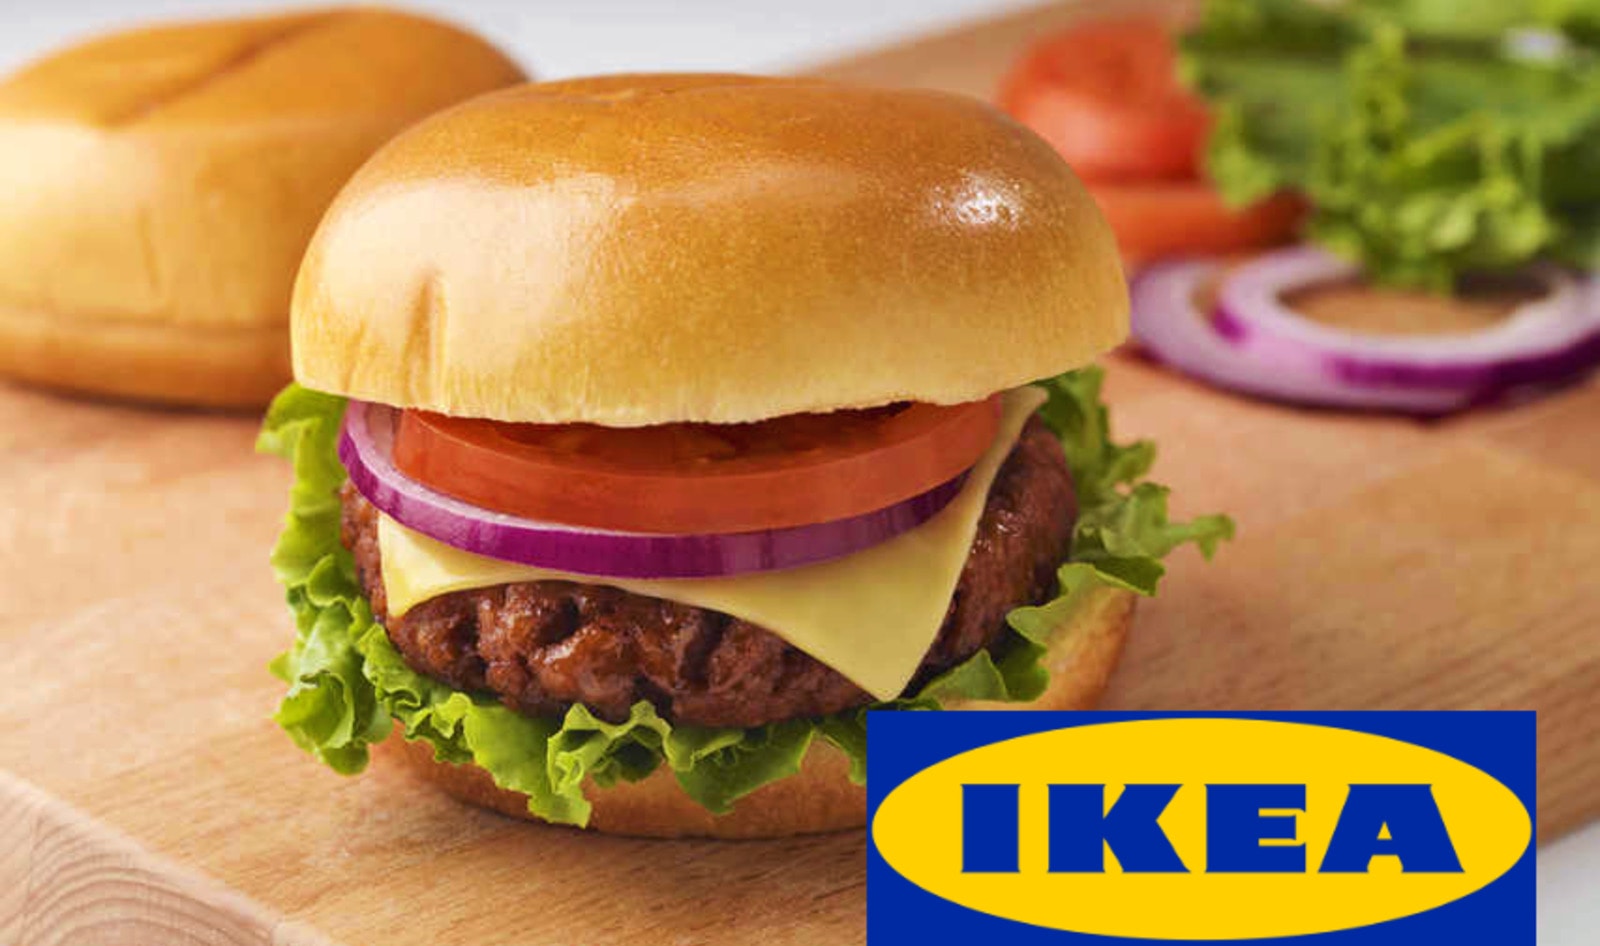 IKEA Launches Its First Vegan Burger in Canada